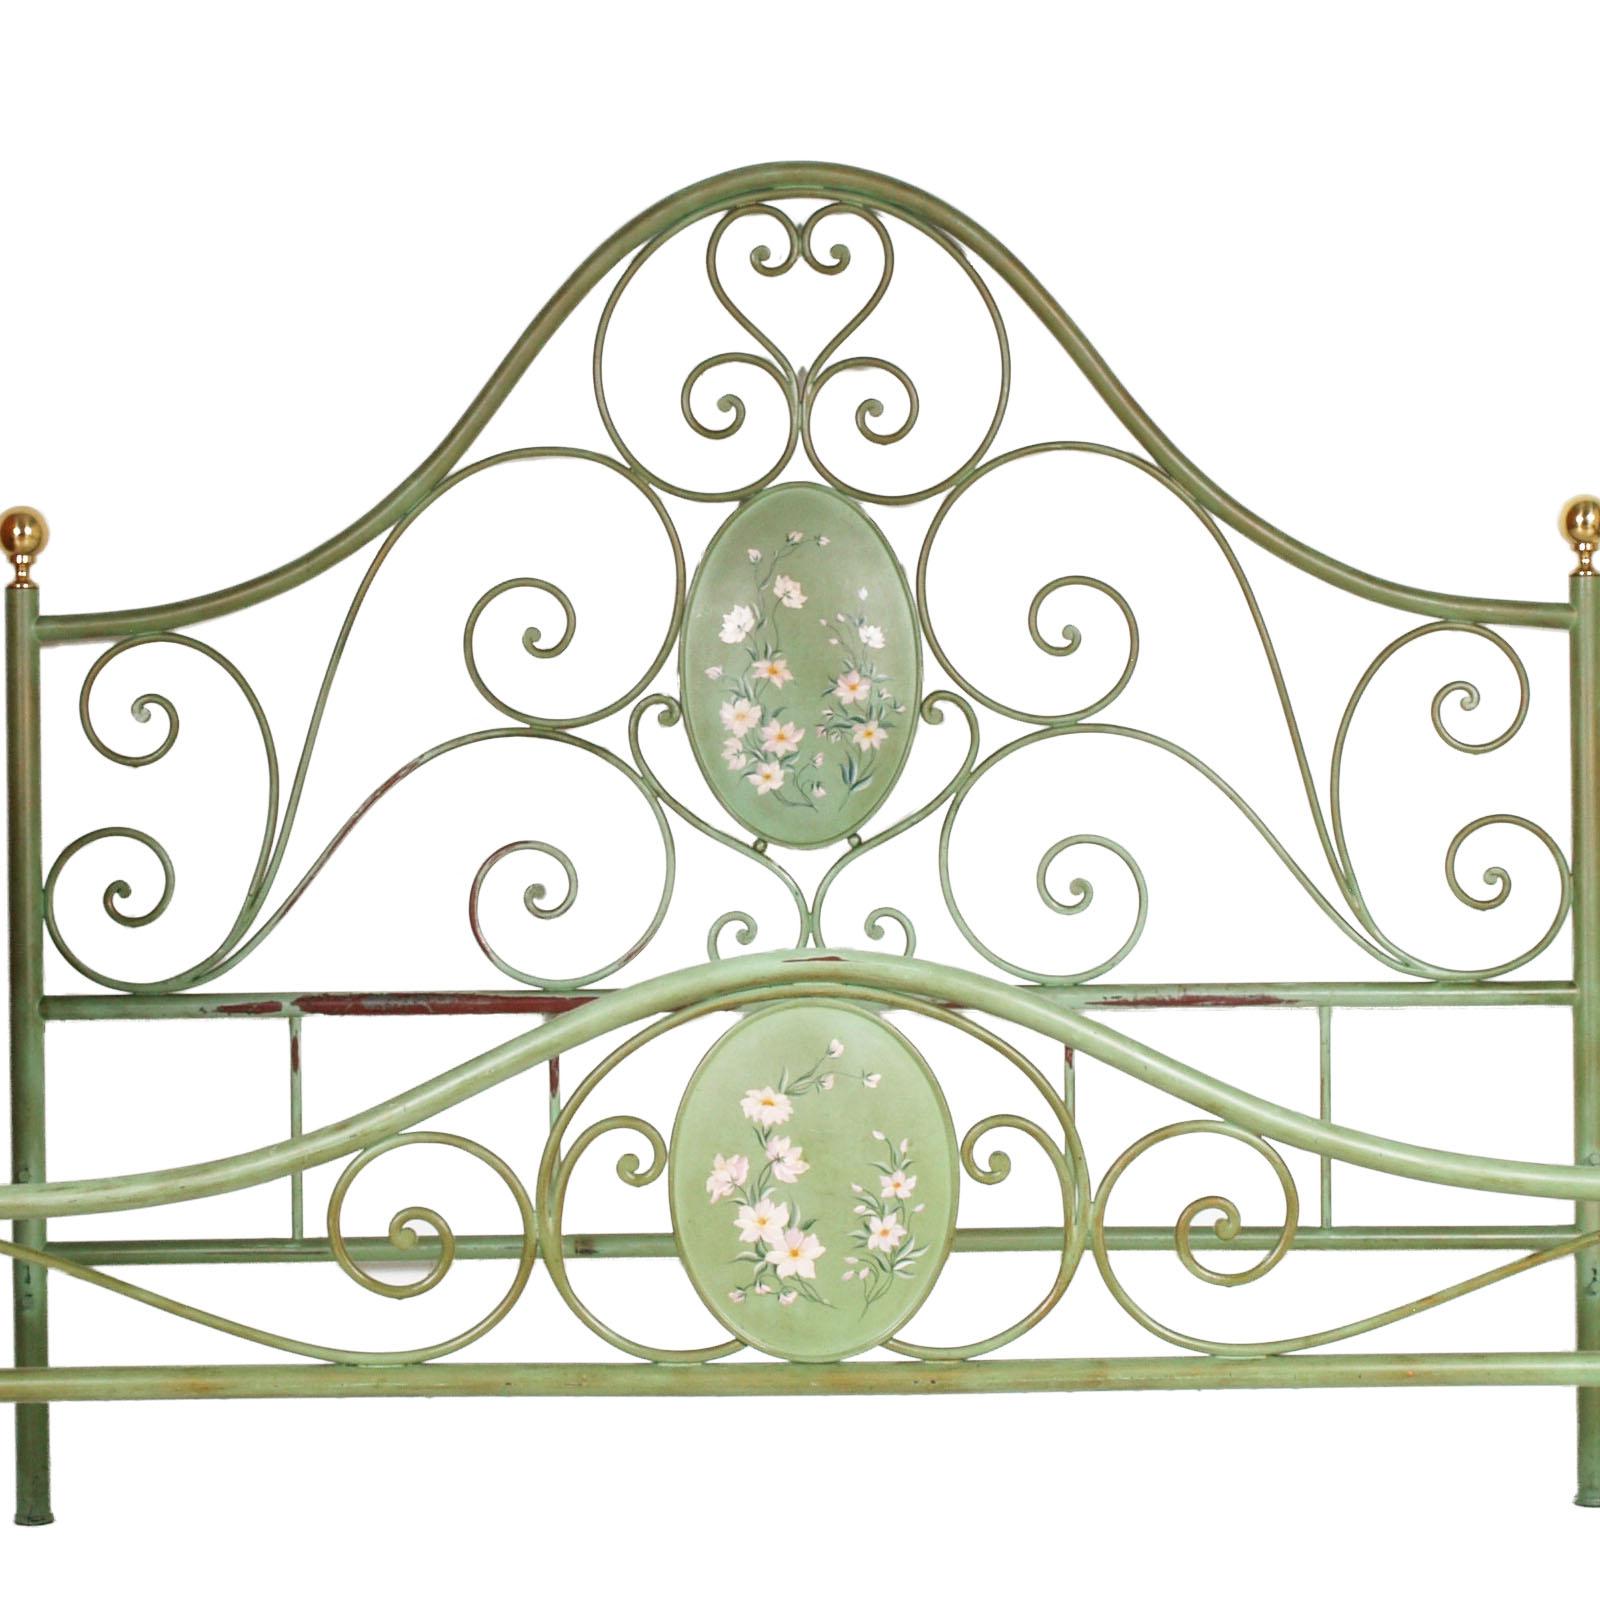 Early 20th century Italian double bed, green antiqued painted & hand-decorated in iron and brass parts. Art Nouveau style, in good conditions.

Measures cm: H 85\154, W 180, D 208.